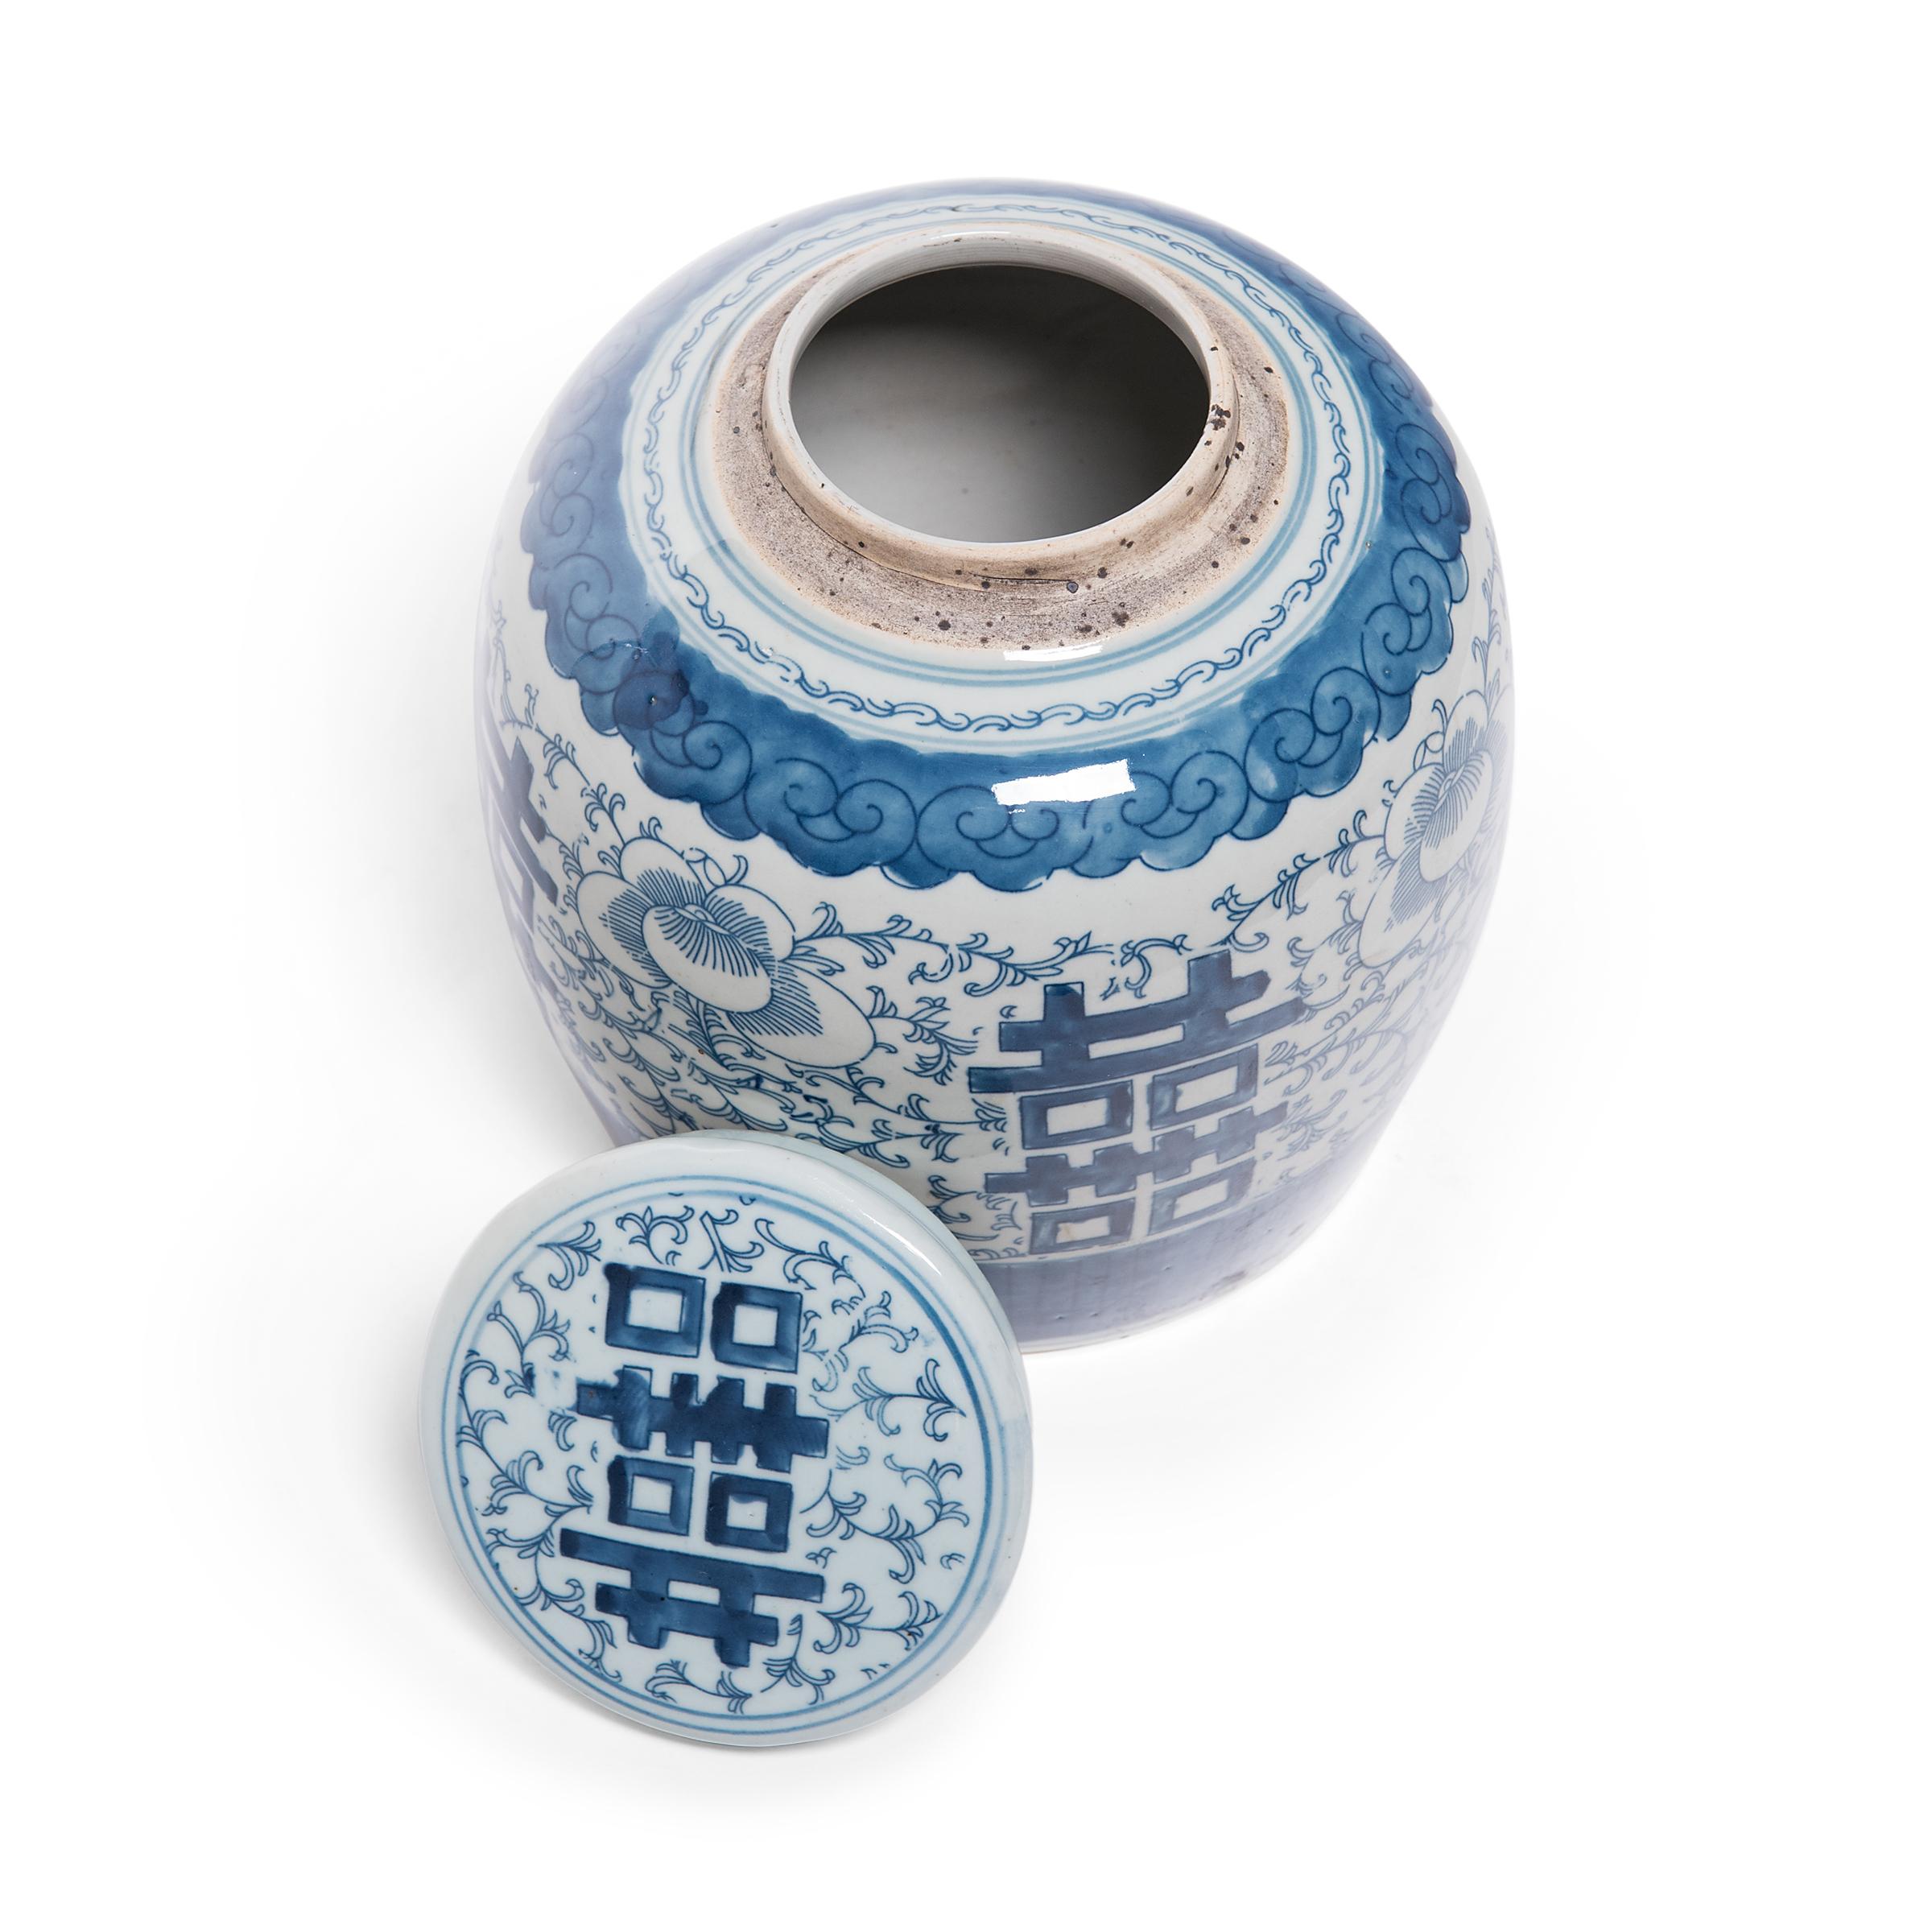 Contemporary Chinese Blue and White Double Happiness Jar